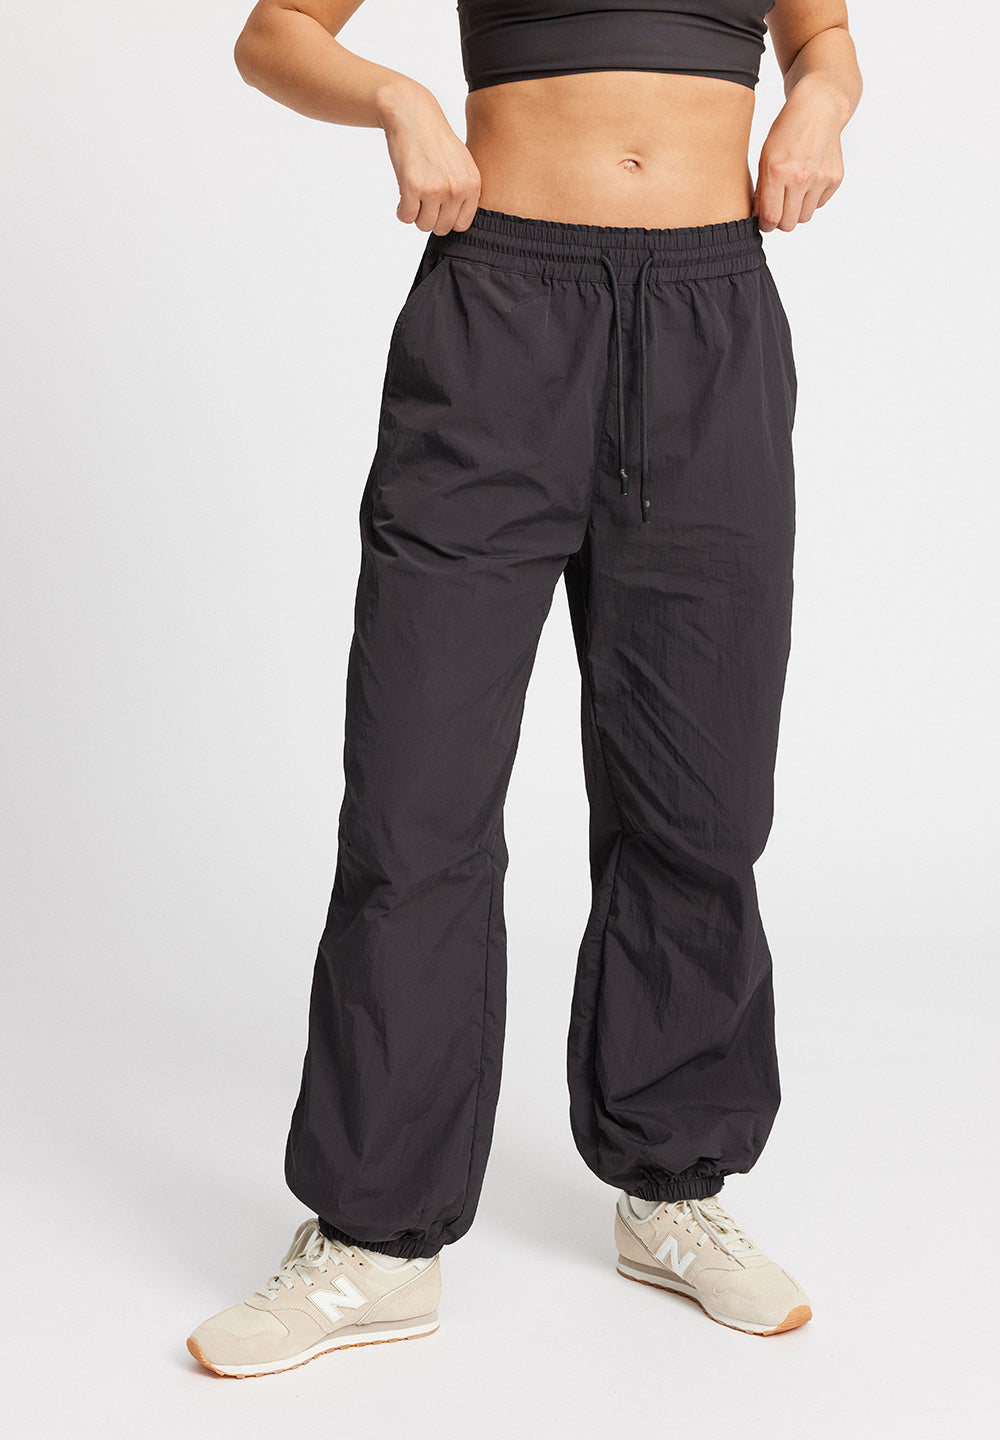 Macho Sporto Men's Track Pants 103 – Online Shopping site in India